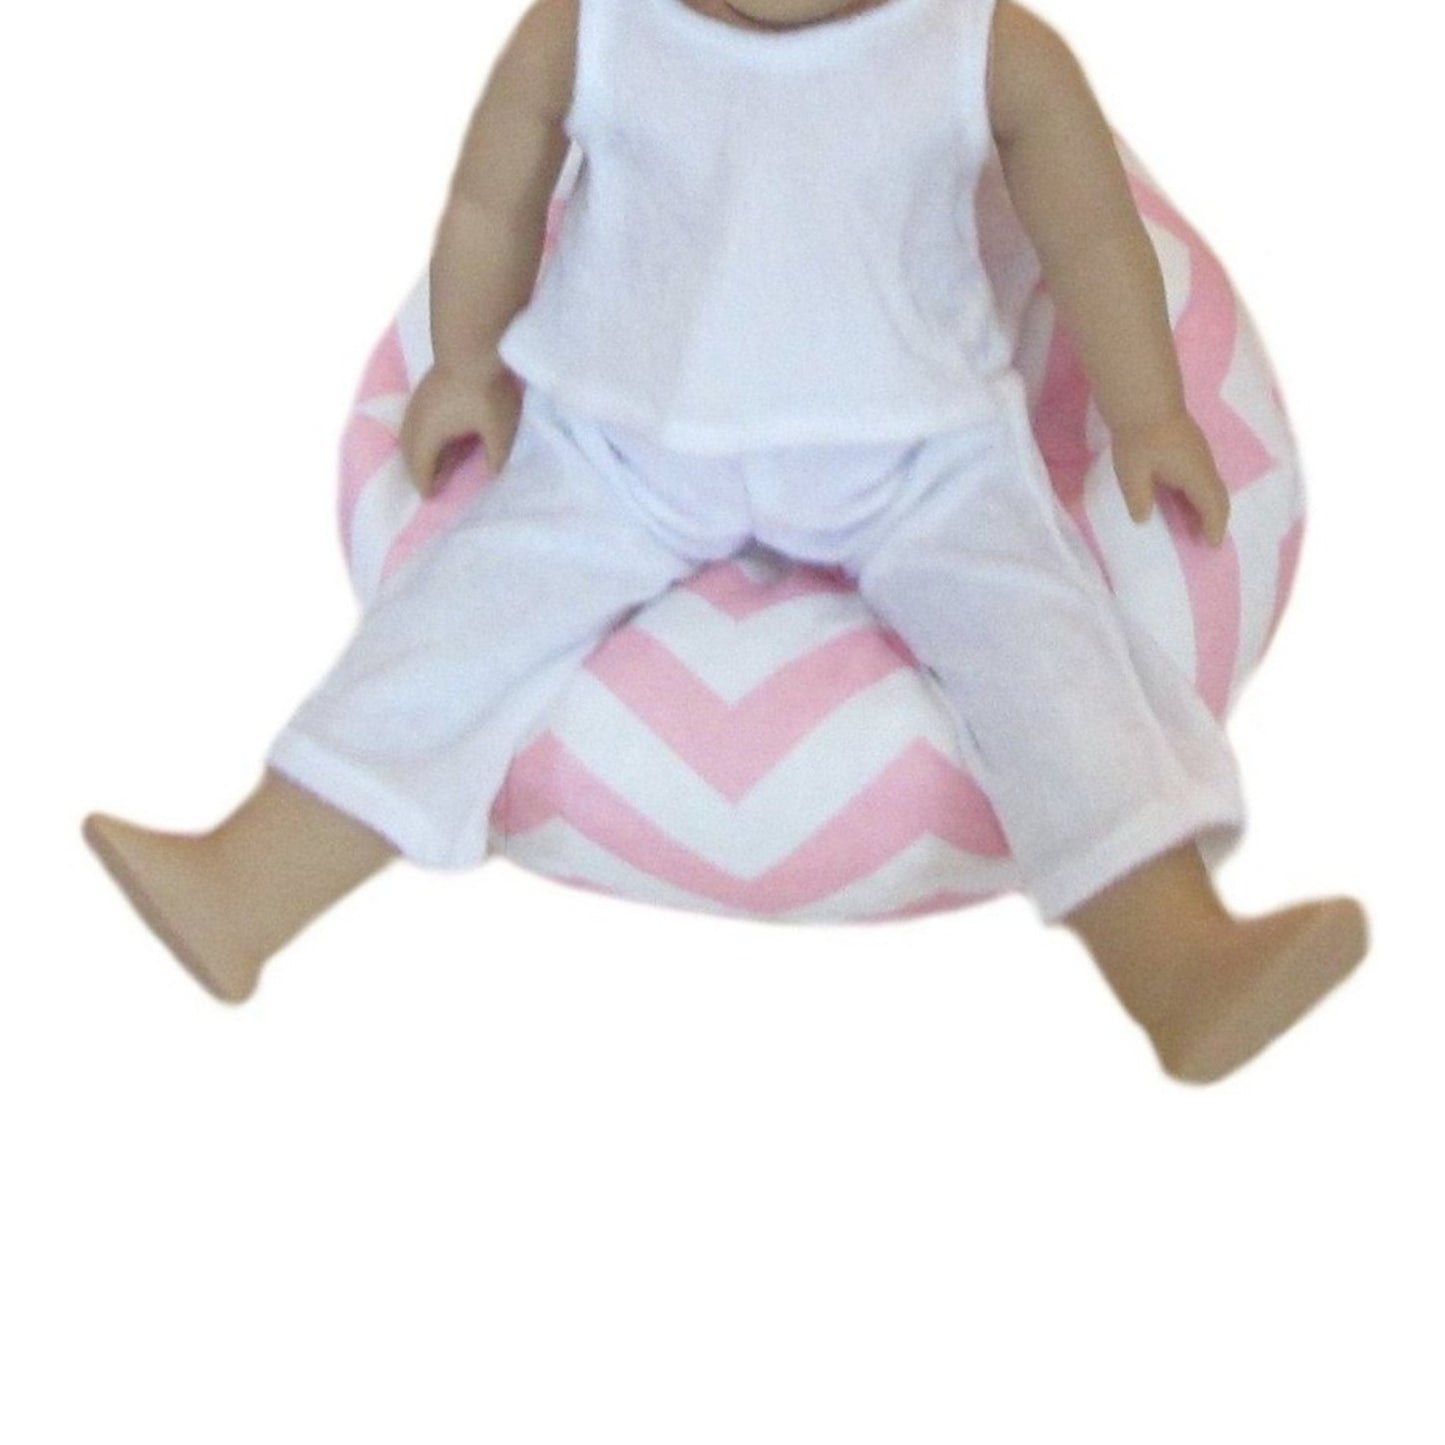 Pink Chevron Doll Bean Bag Chair for 18-inch dolls with doll